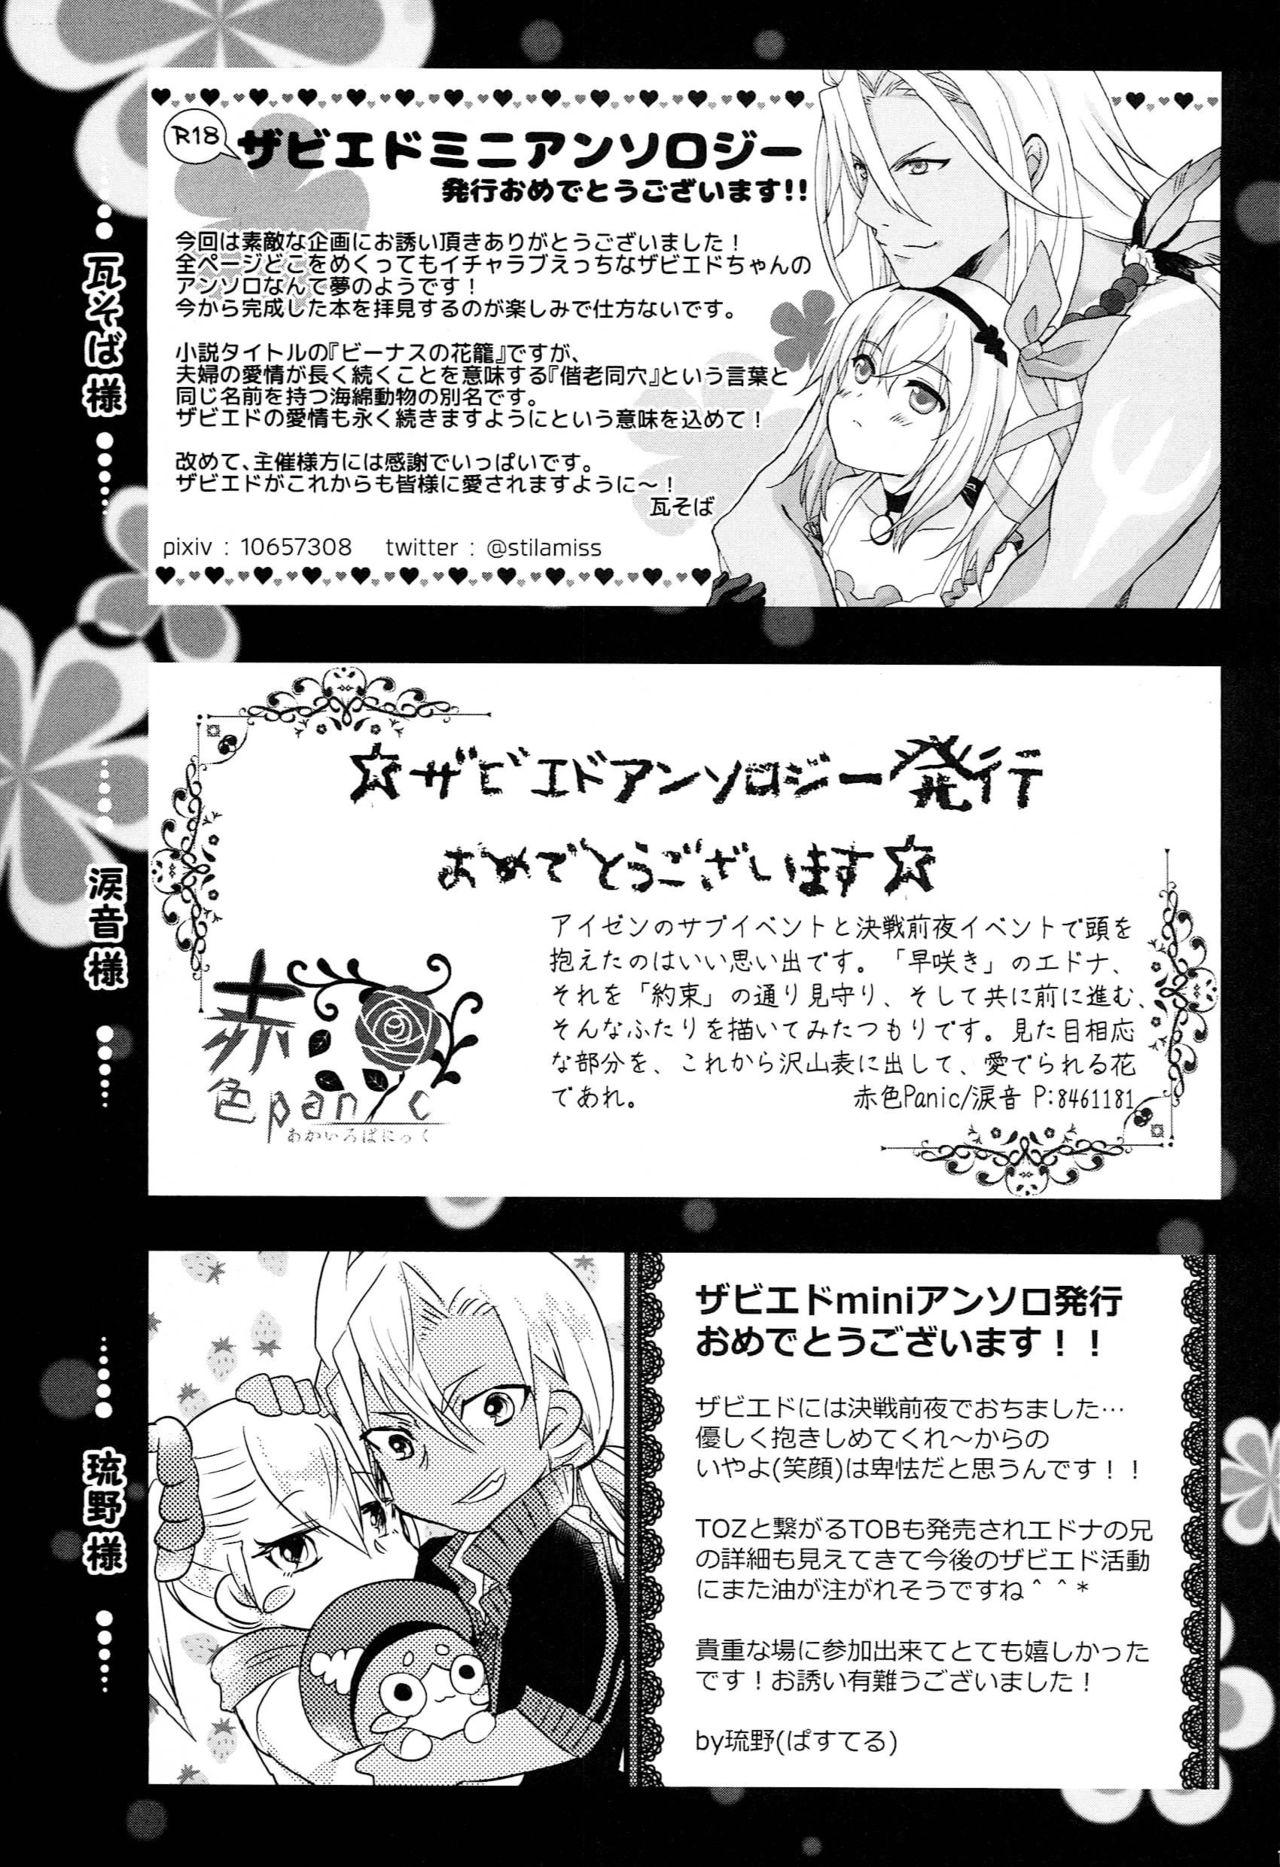 Lolicon Like a Sweet Bullet - Tales of zestiria Punishment - Page 104